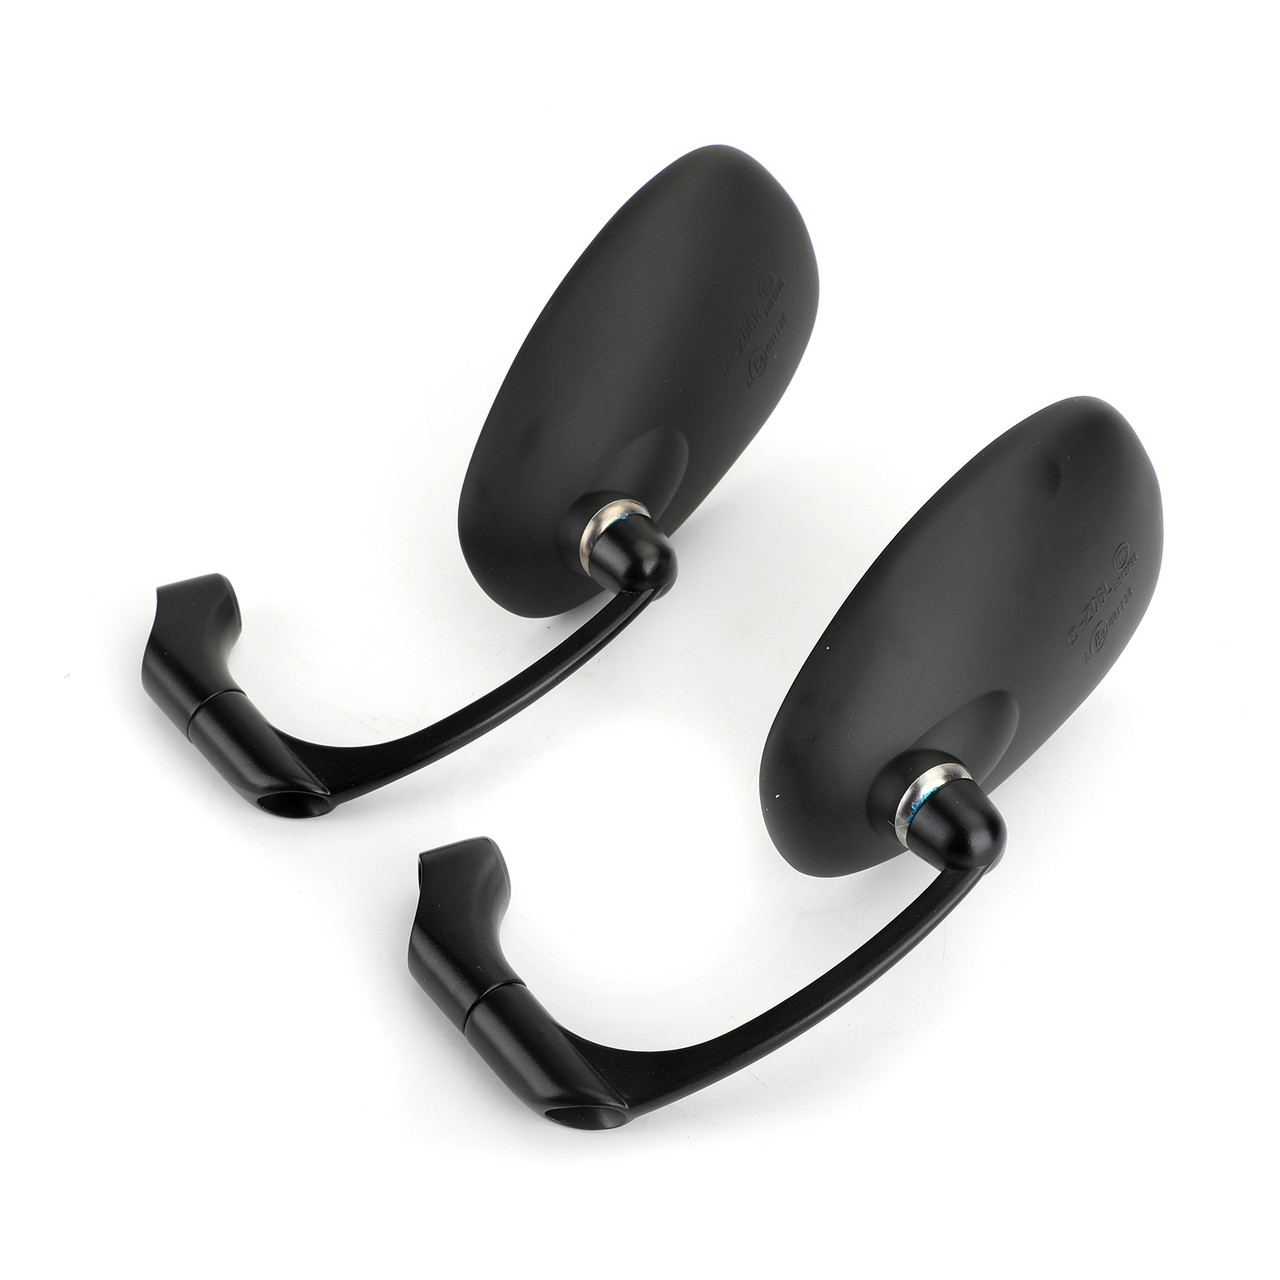 Motorcycle L-bar Retro Oval Rearview Side Mirrors M8 / M10 Pair fits for Honda with Standard Metric Screws Black~BC2